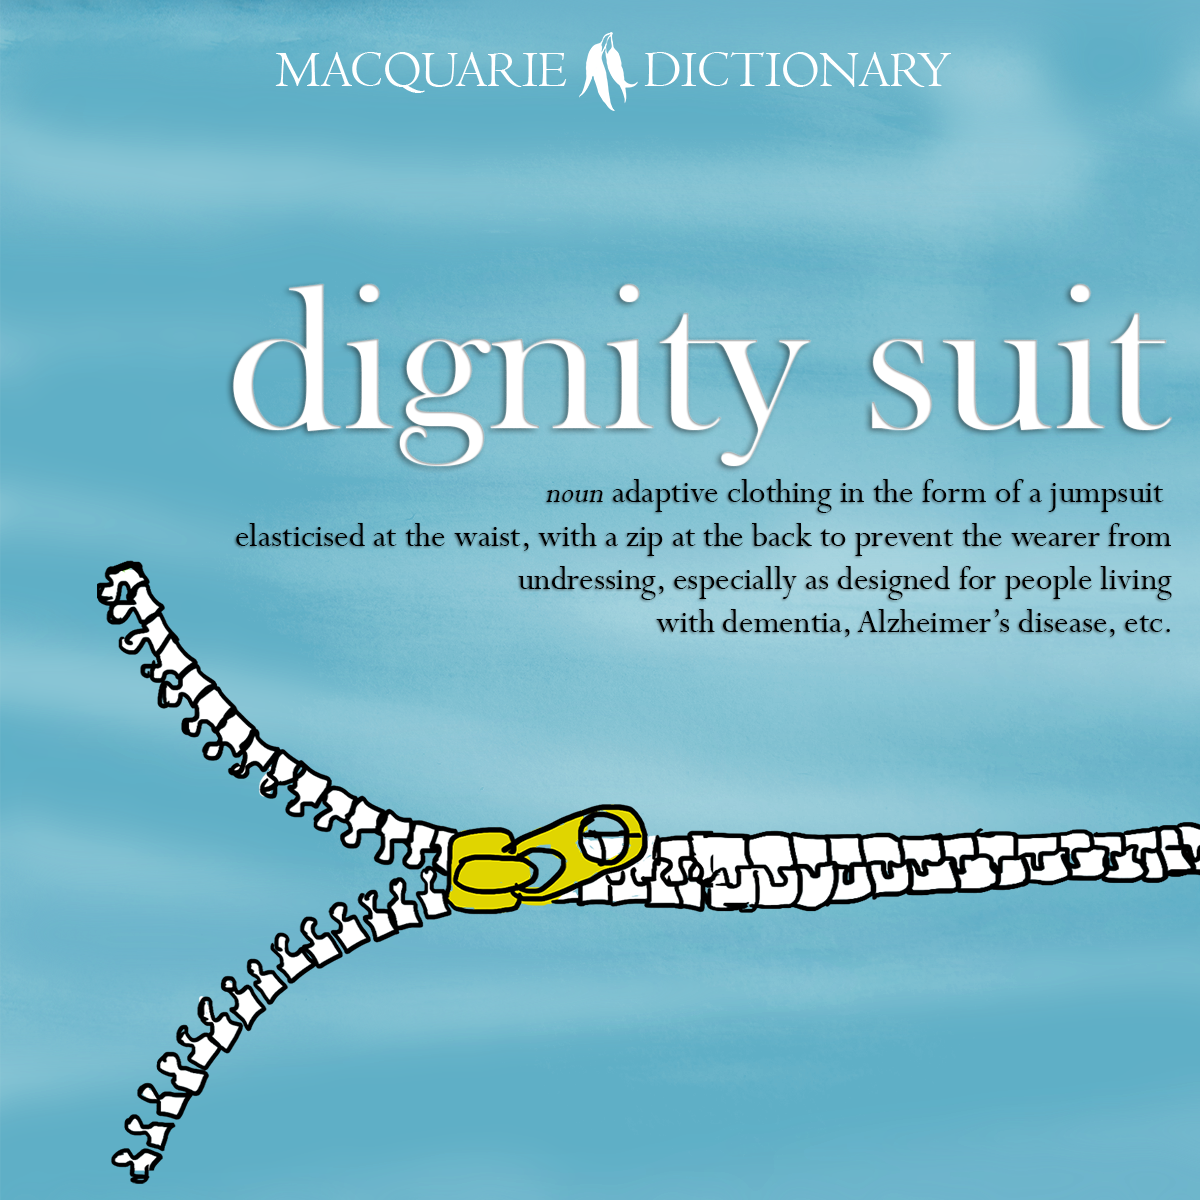 Word of the Year 2021 - dignity suit